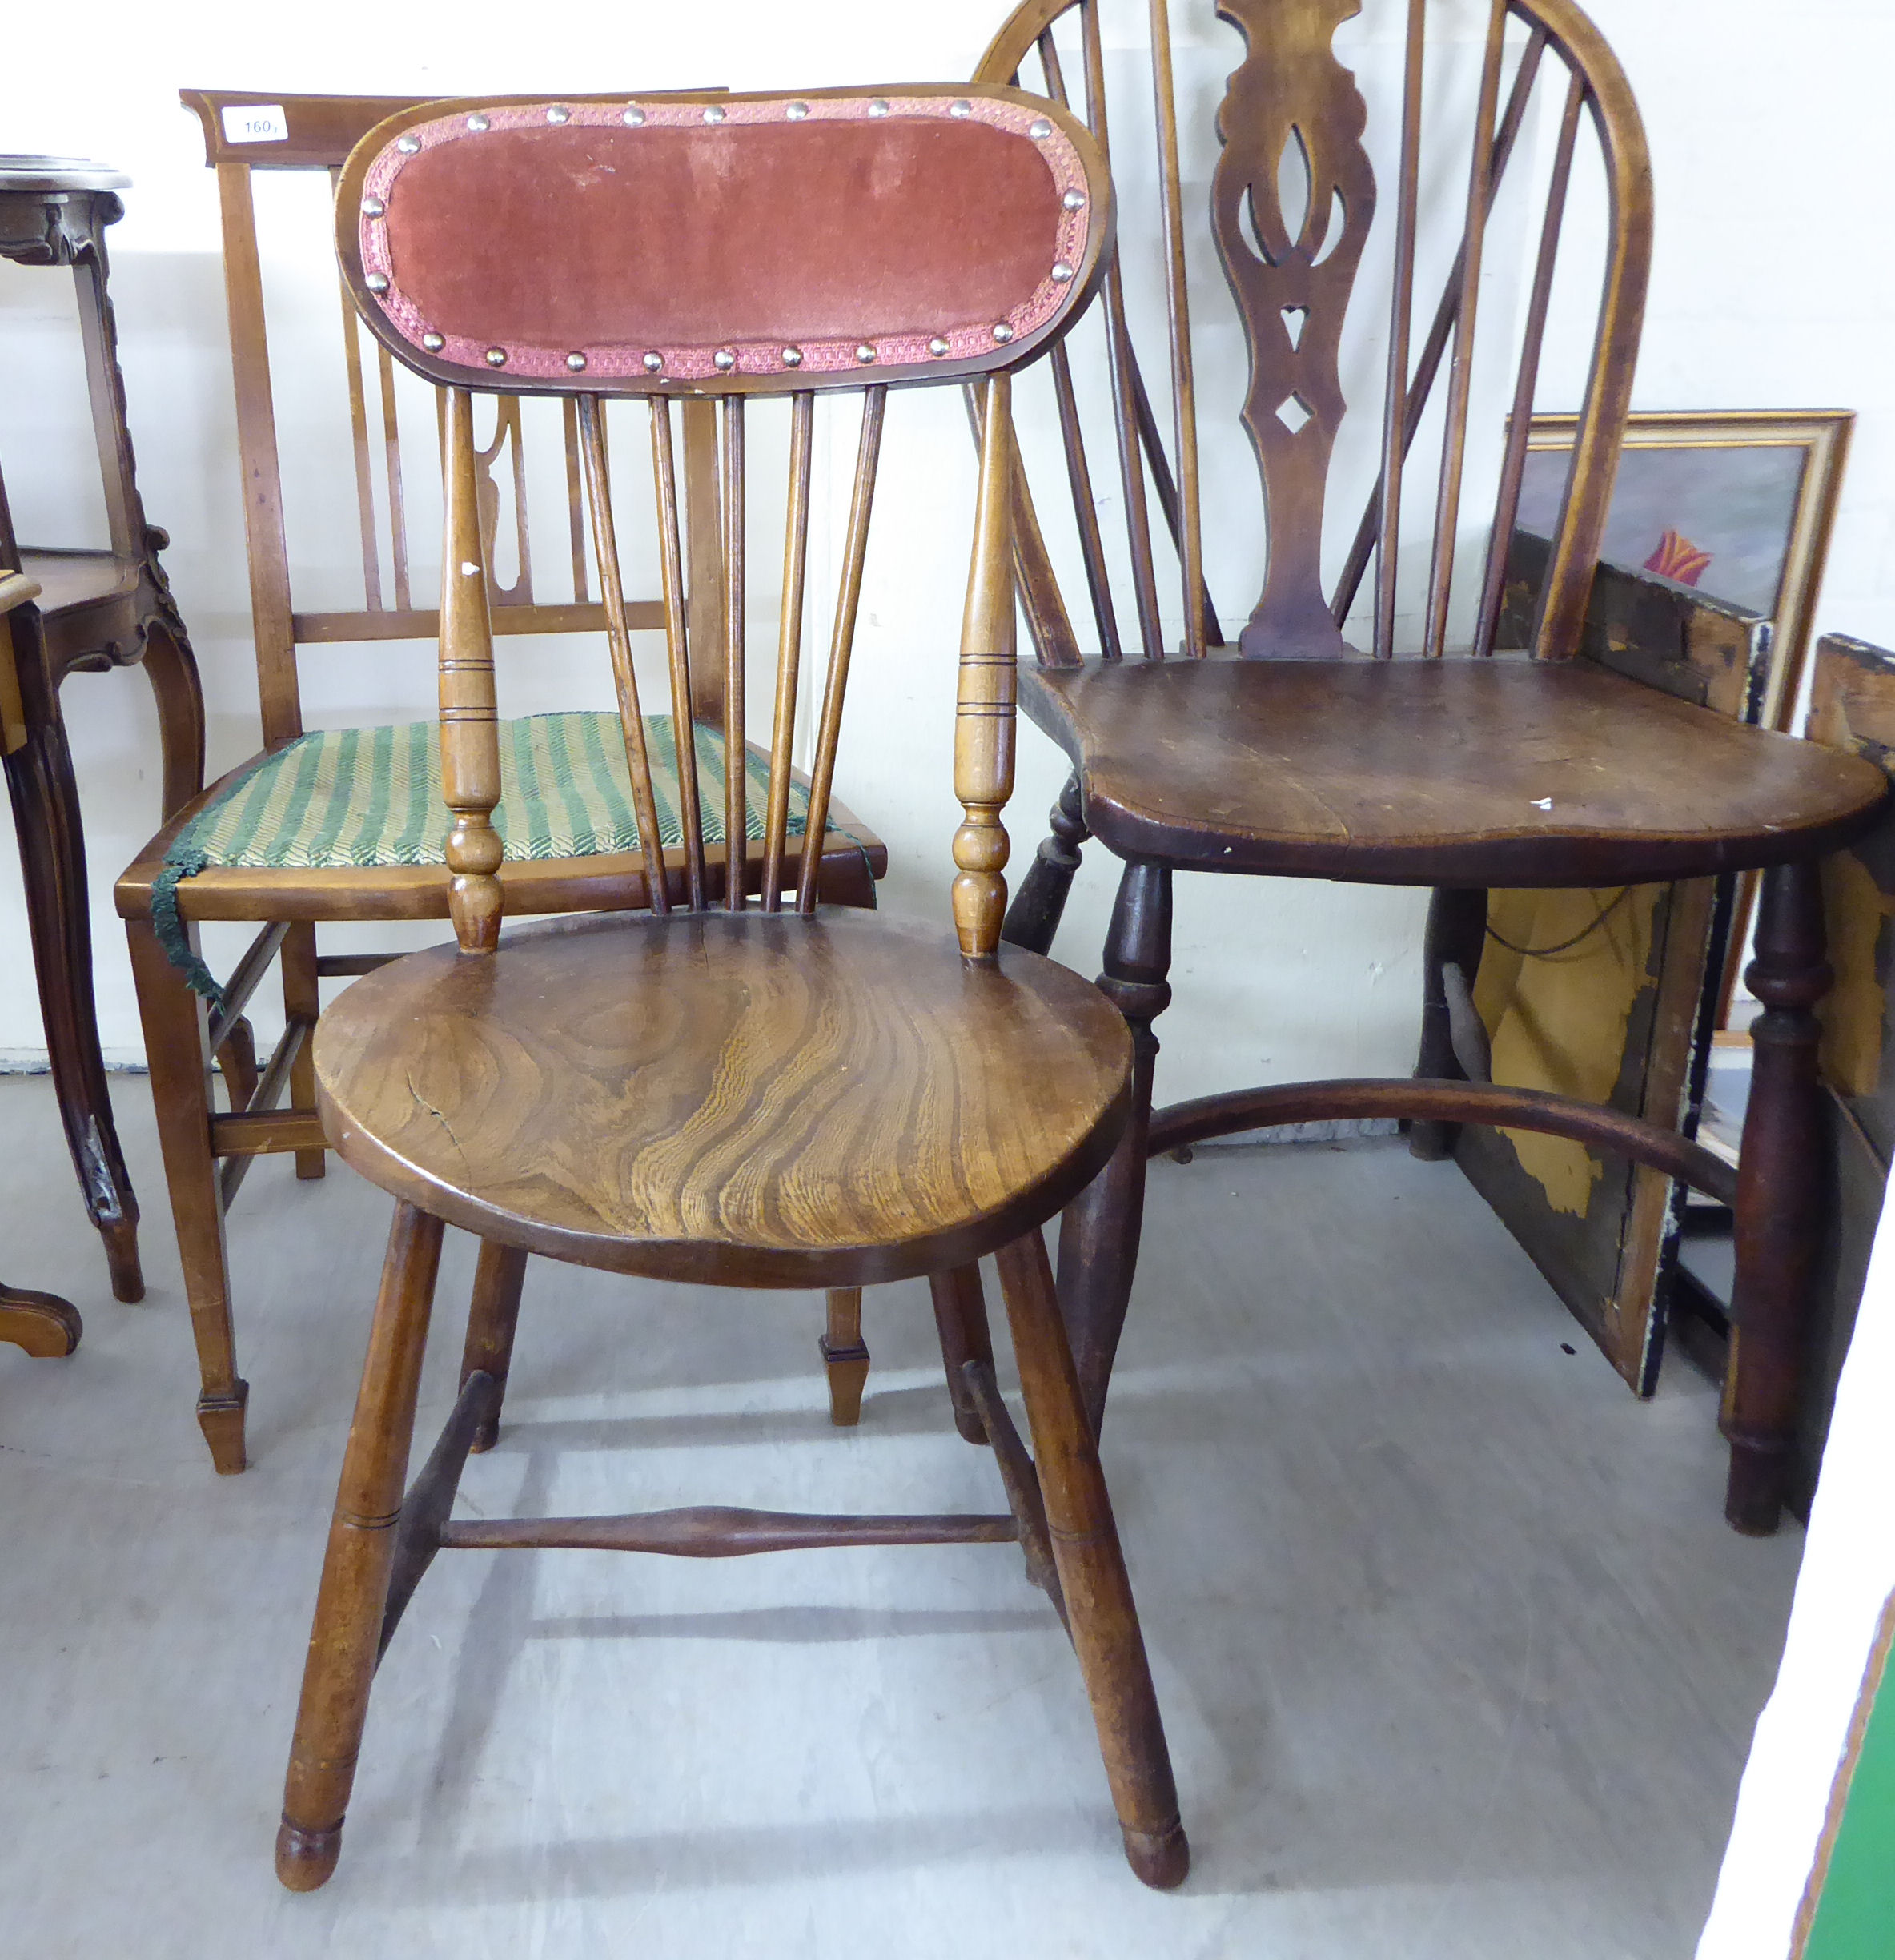 Three Victorian/Edwardian period mahogany and other chairs: to include a child's bedroom chair - Image 3 of 3